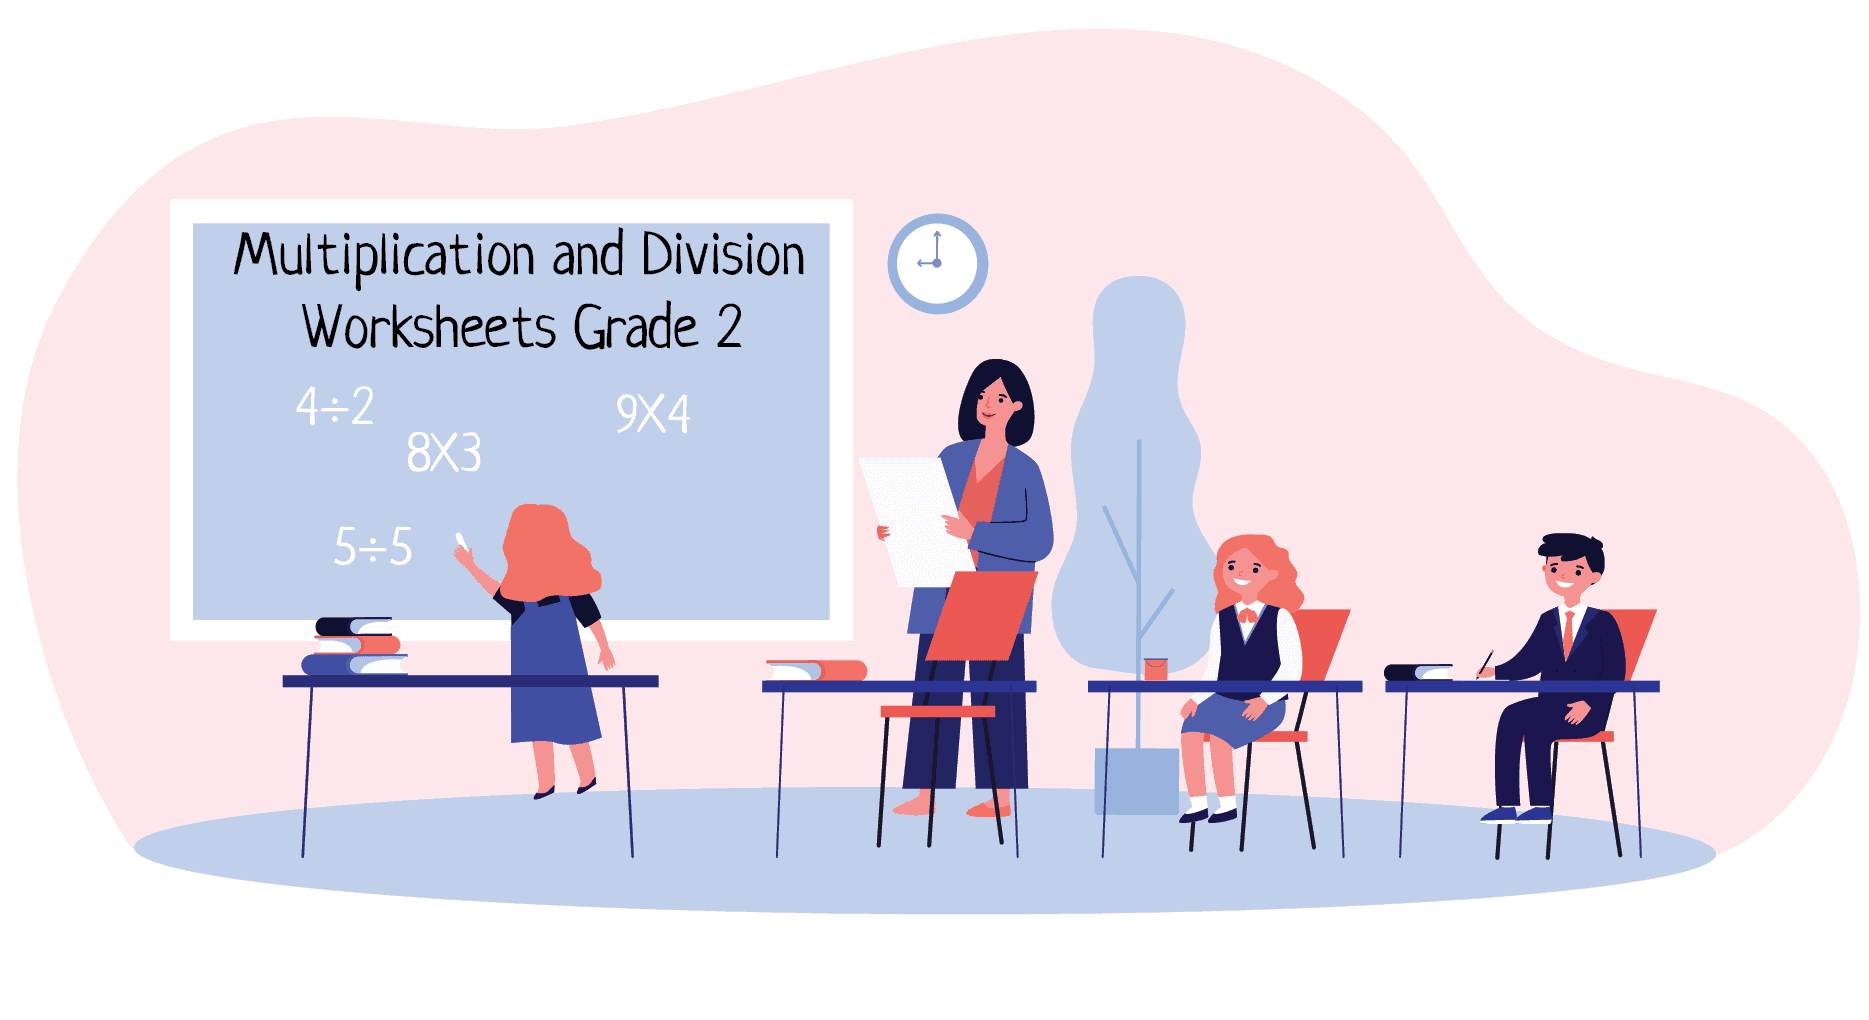 10 Multiplication and Division Worksheets Grade 2 | Free Printable